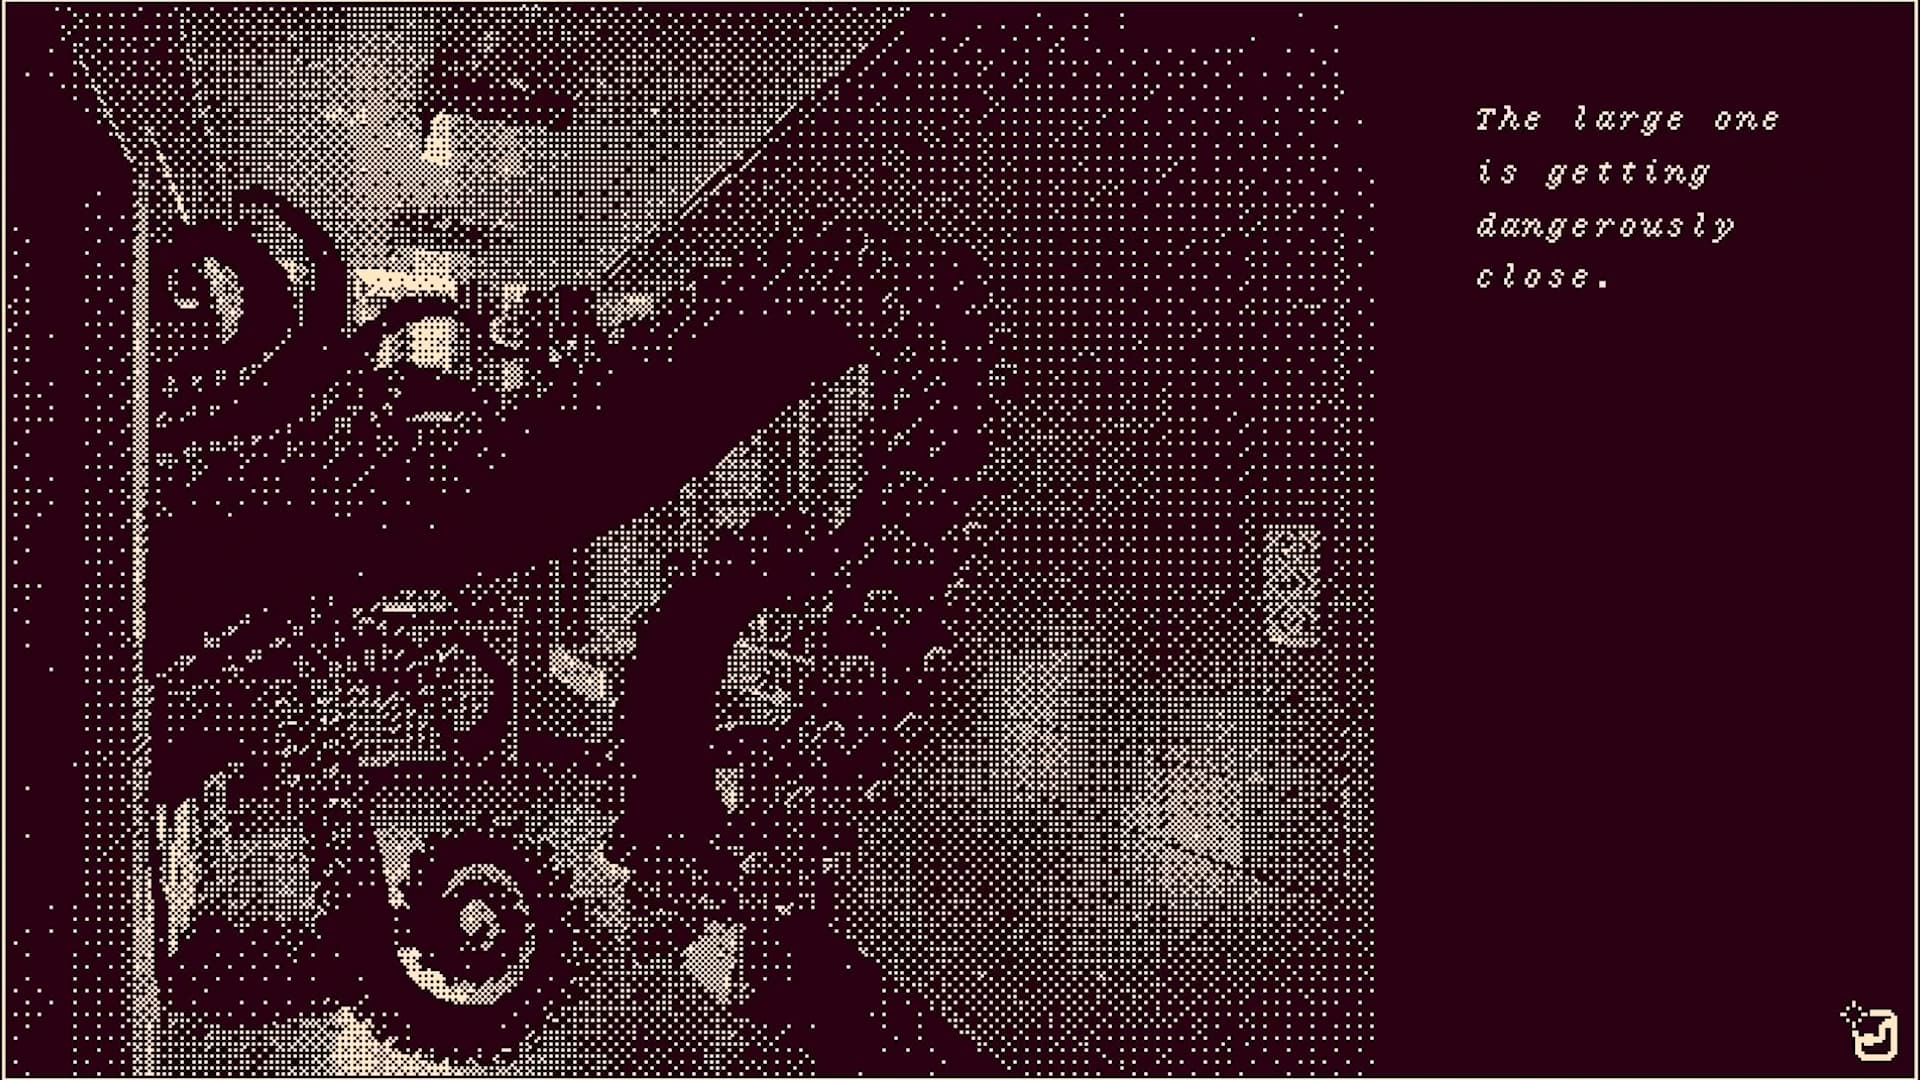 Black tentacles pouring from a bathroom into a hallway, approaching the screen